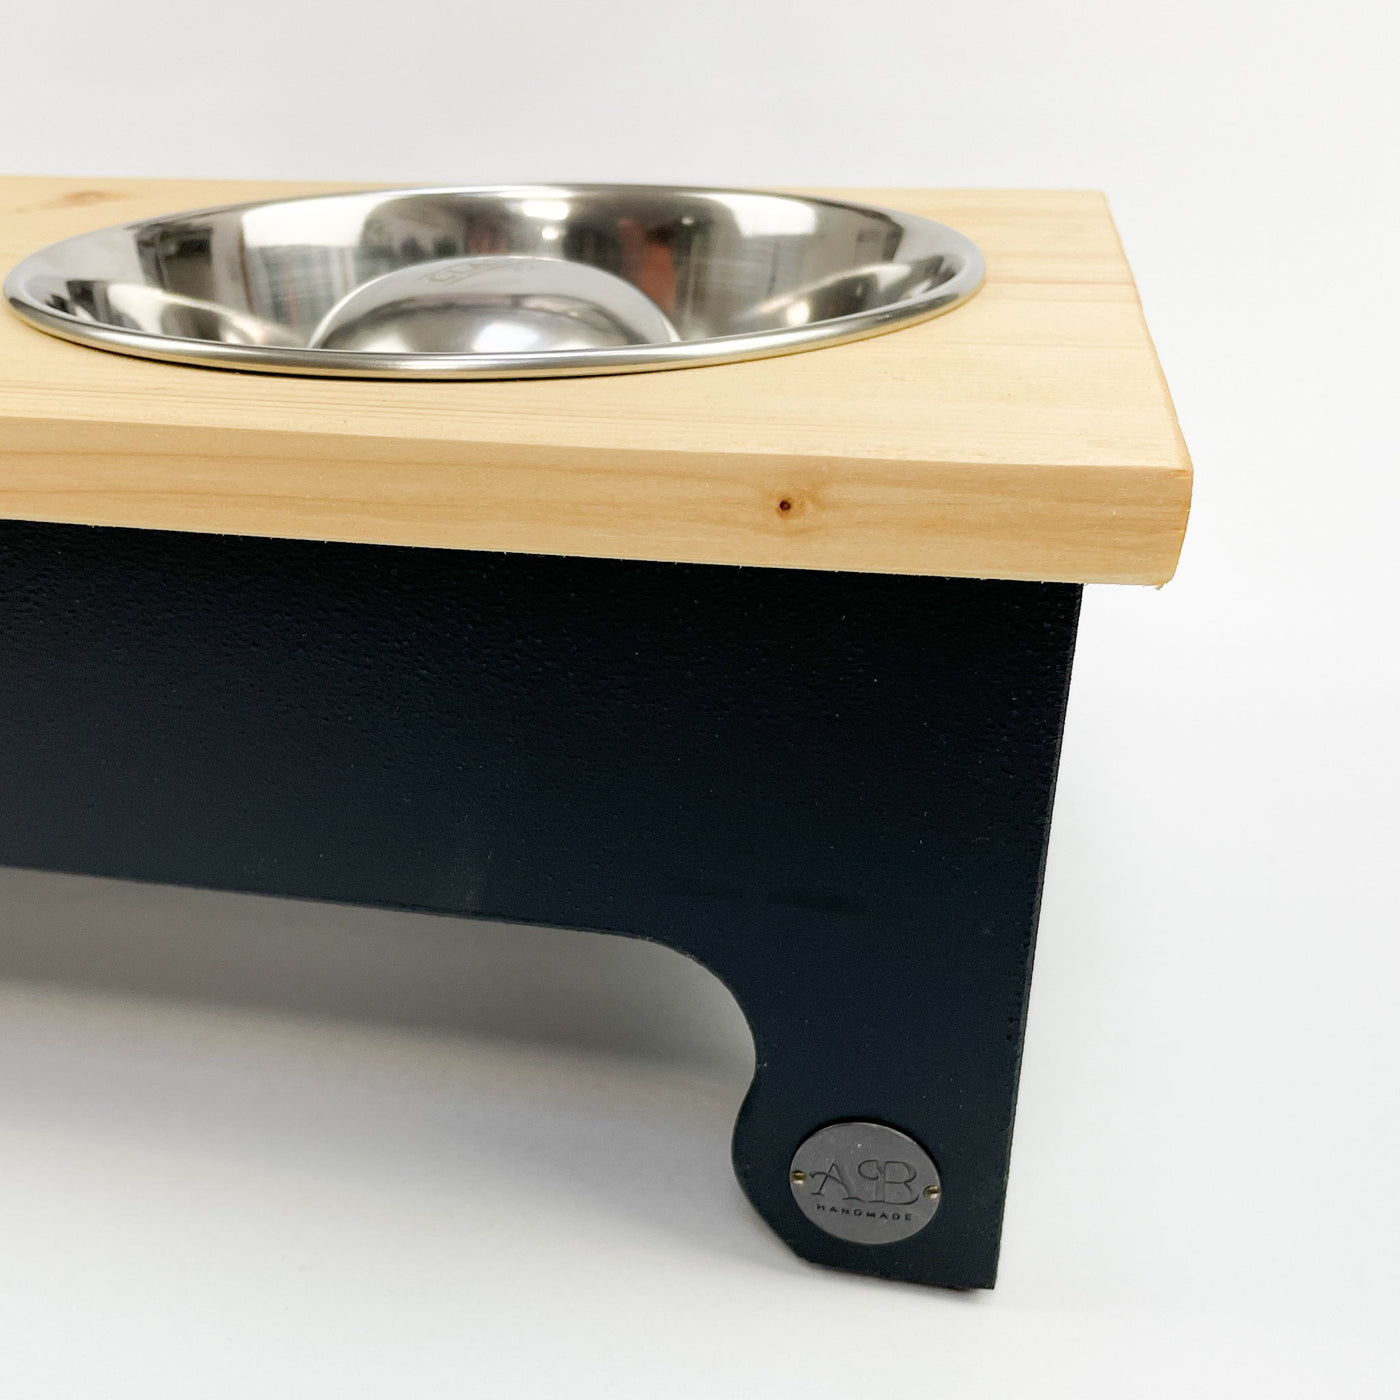 Pine Top Raised Bowl Feeding Stand in charcoal black, suitable for puppies or cats.